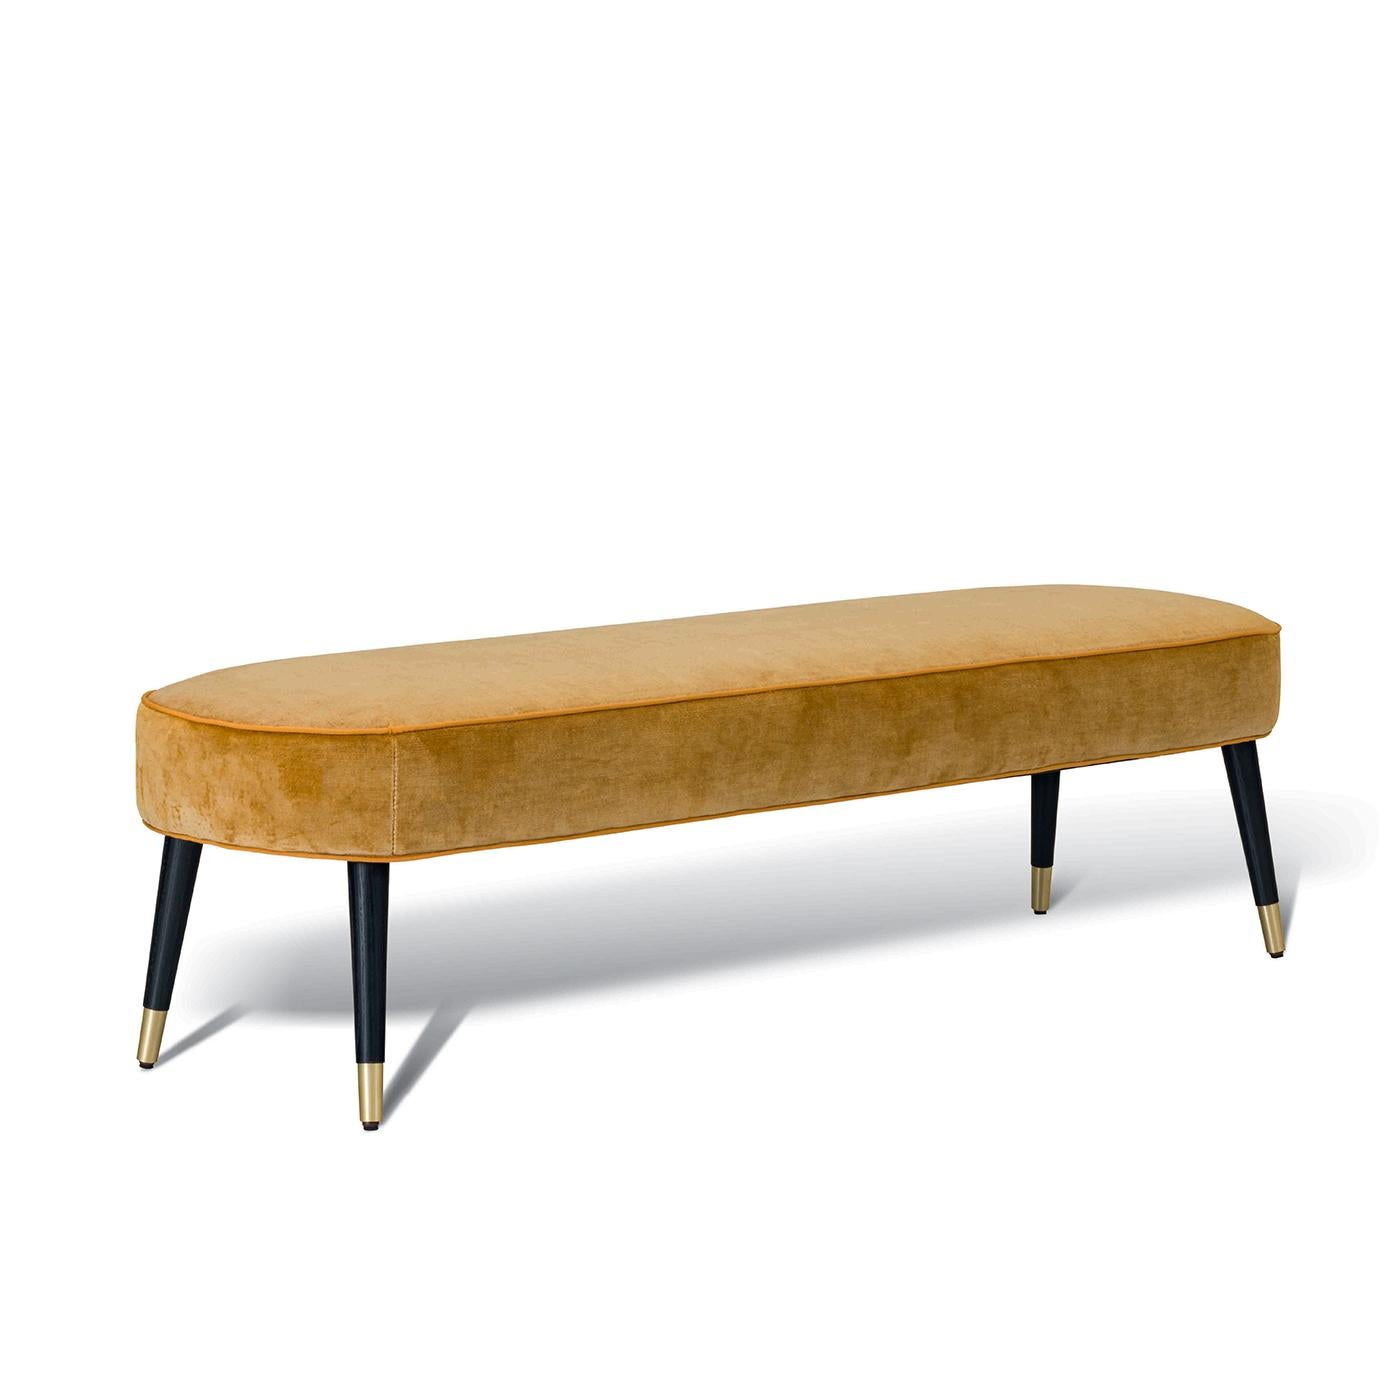 This bench features a lacquered beechwood or walnut wood structure. The legs tip are made of bronze painted metal or satin brass. The plywood seat is padded with high resistance polyurethane foam at variable density. The cover features a grosgrain